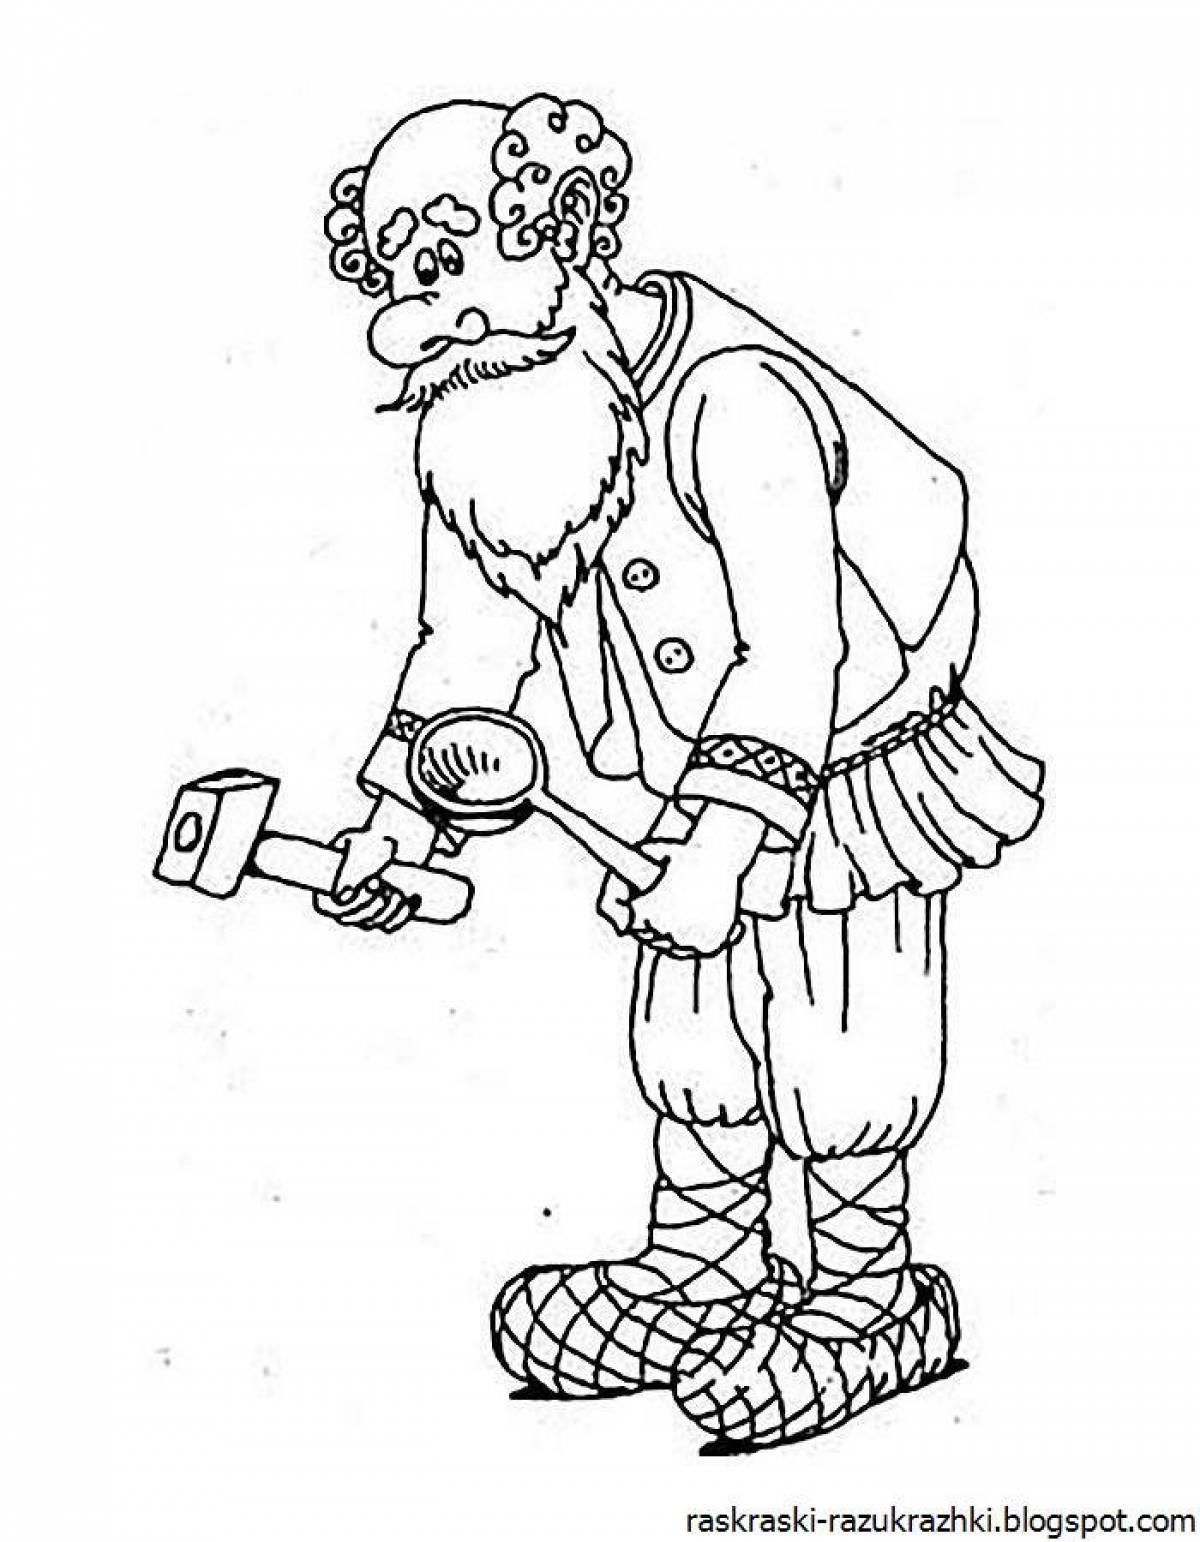 Gracious grandfather coloring page